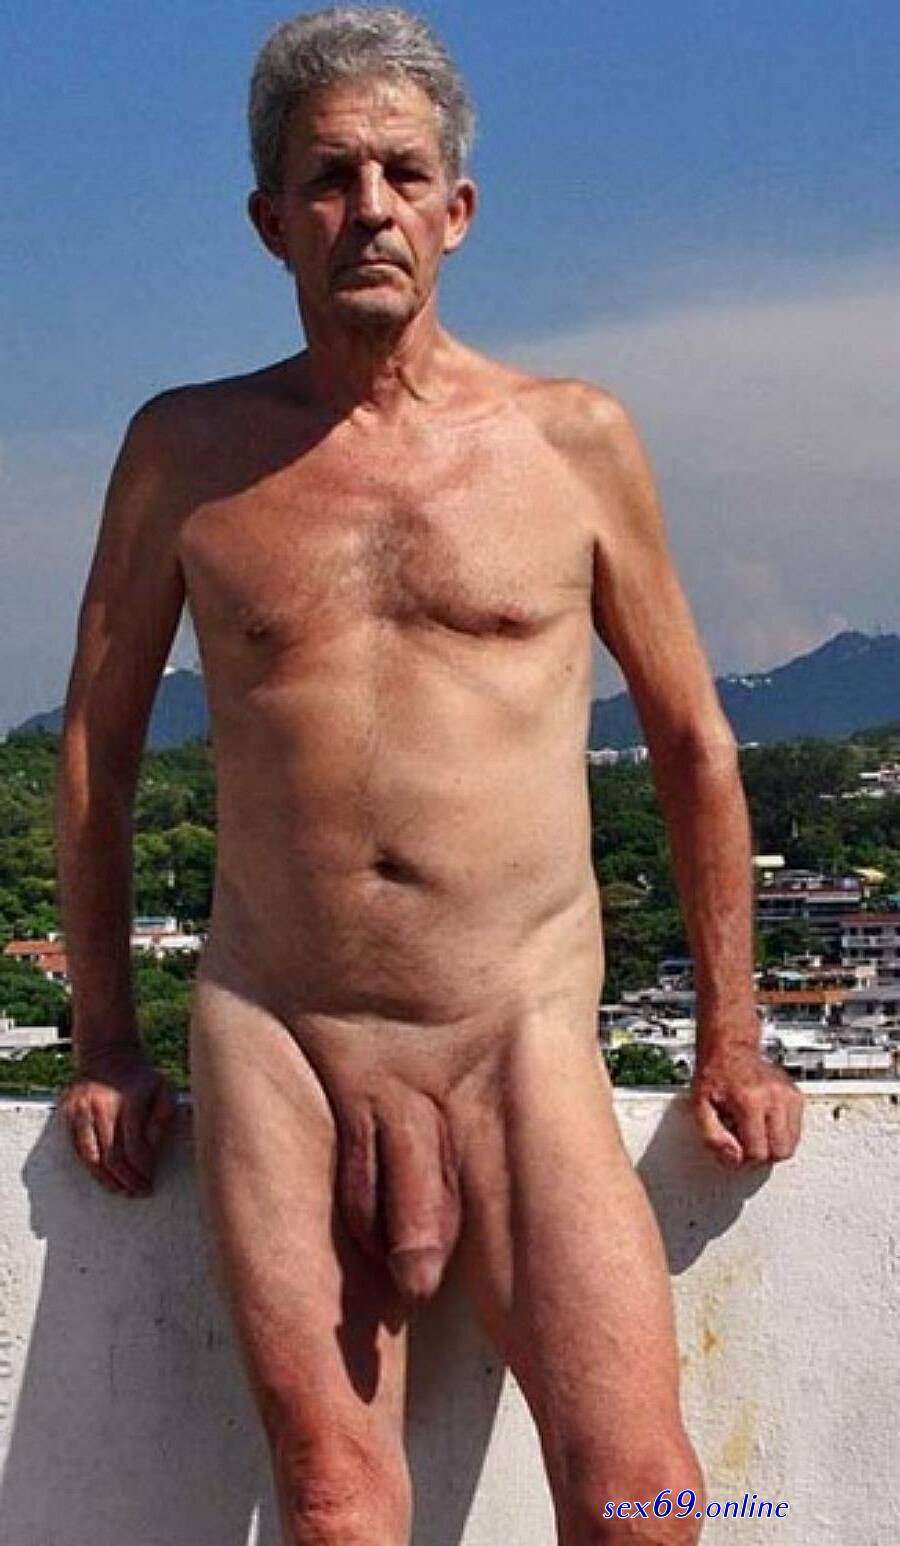 Old Giant Cocks - old men huge cock pics - Sexy photos